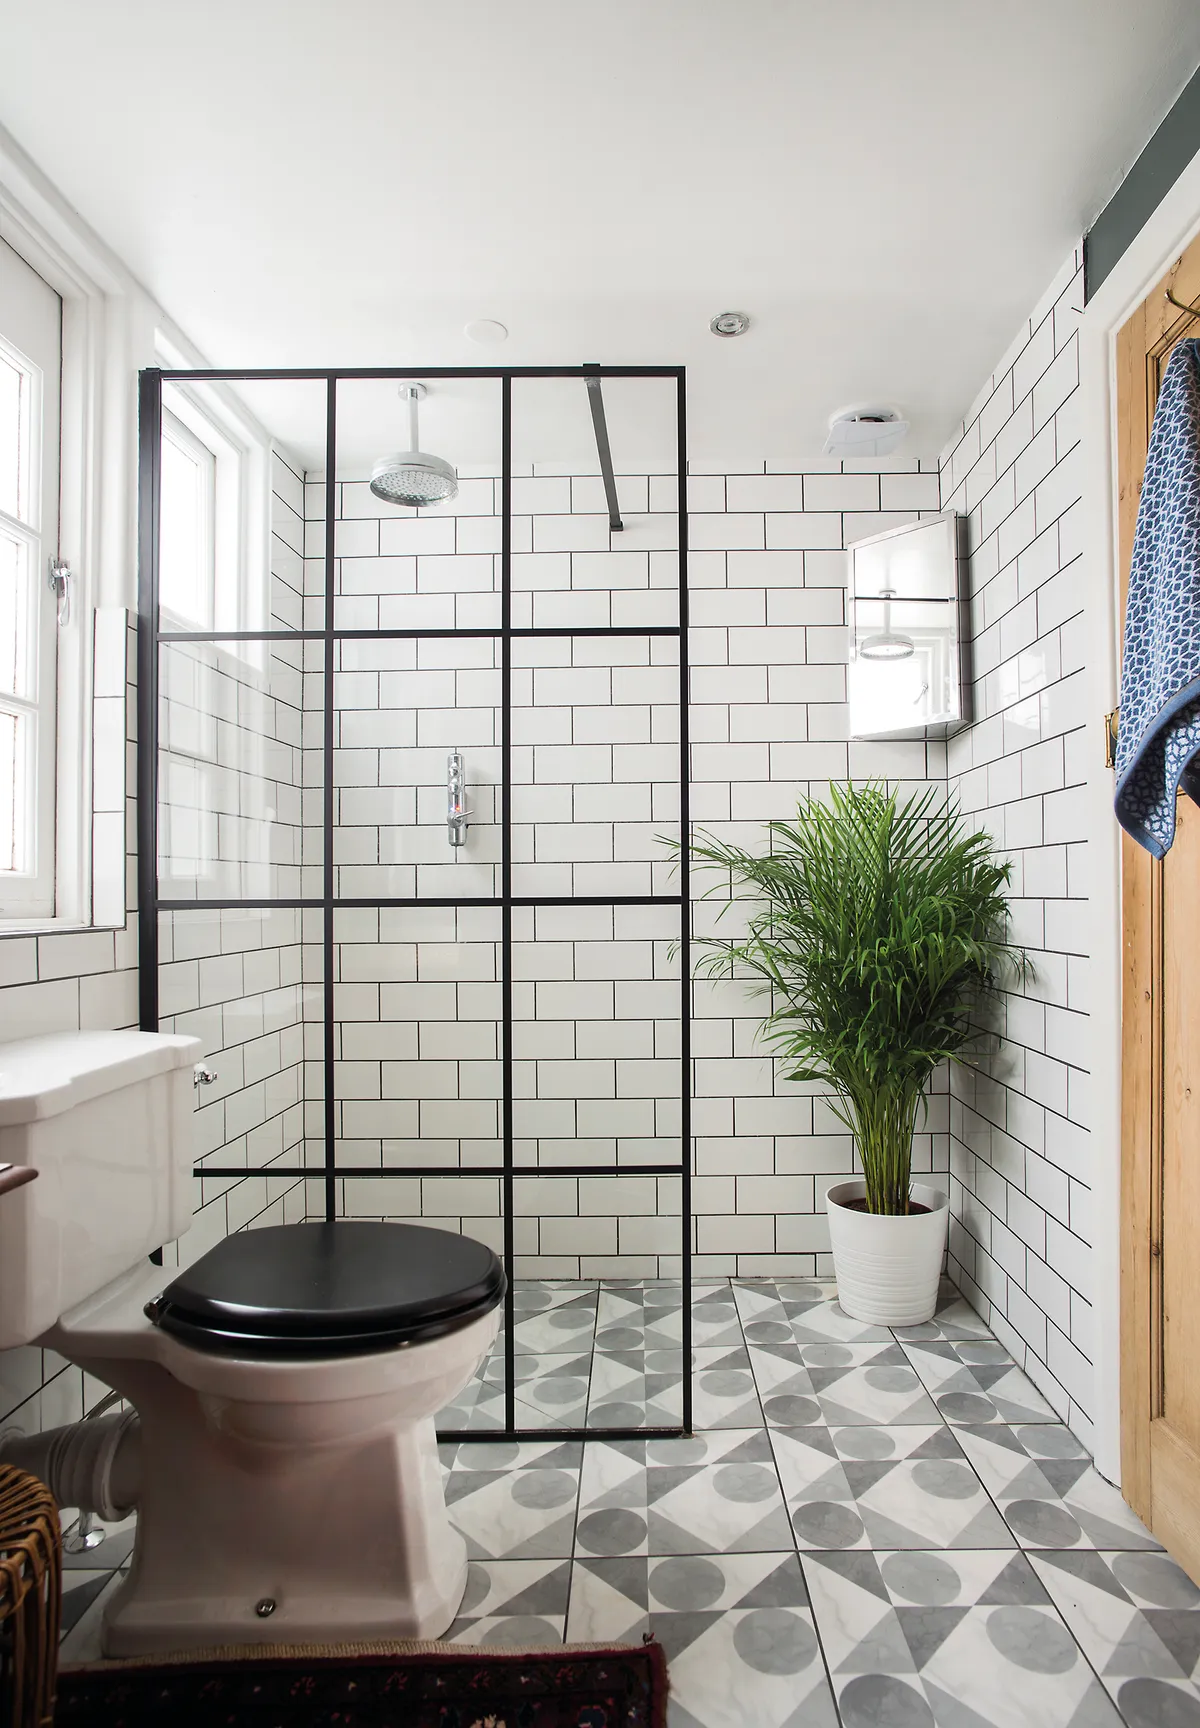 ‘I knew I wanted white metro wall tiles, with dark grey grout for impact. The black Crittall-look shower screen was another must-have as it picks up the rectangular pattern. I rescued the nifty corner cabinet from the recycling centre’